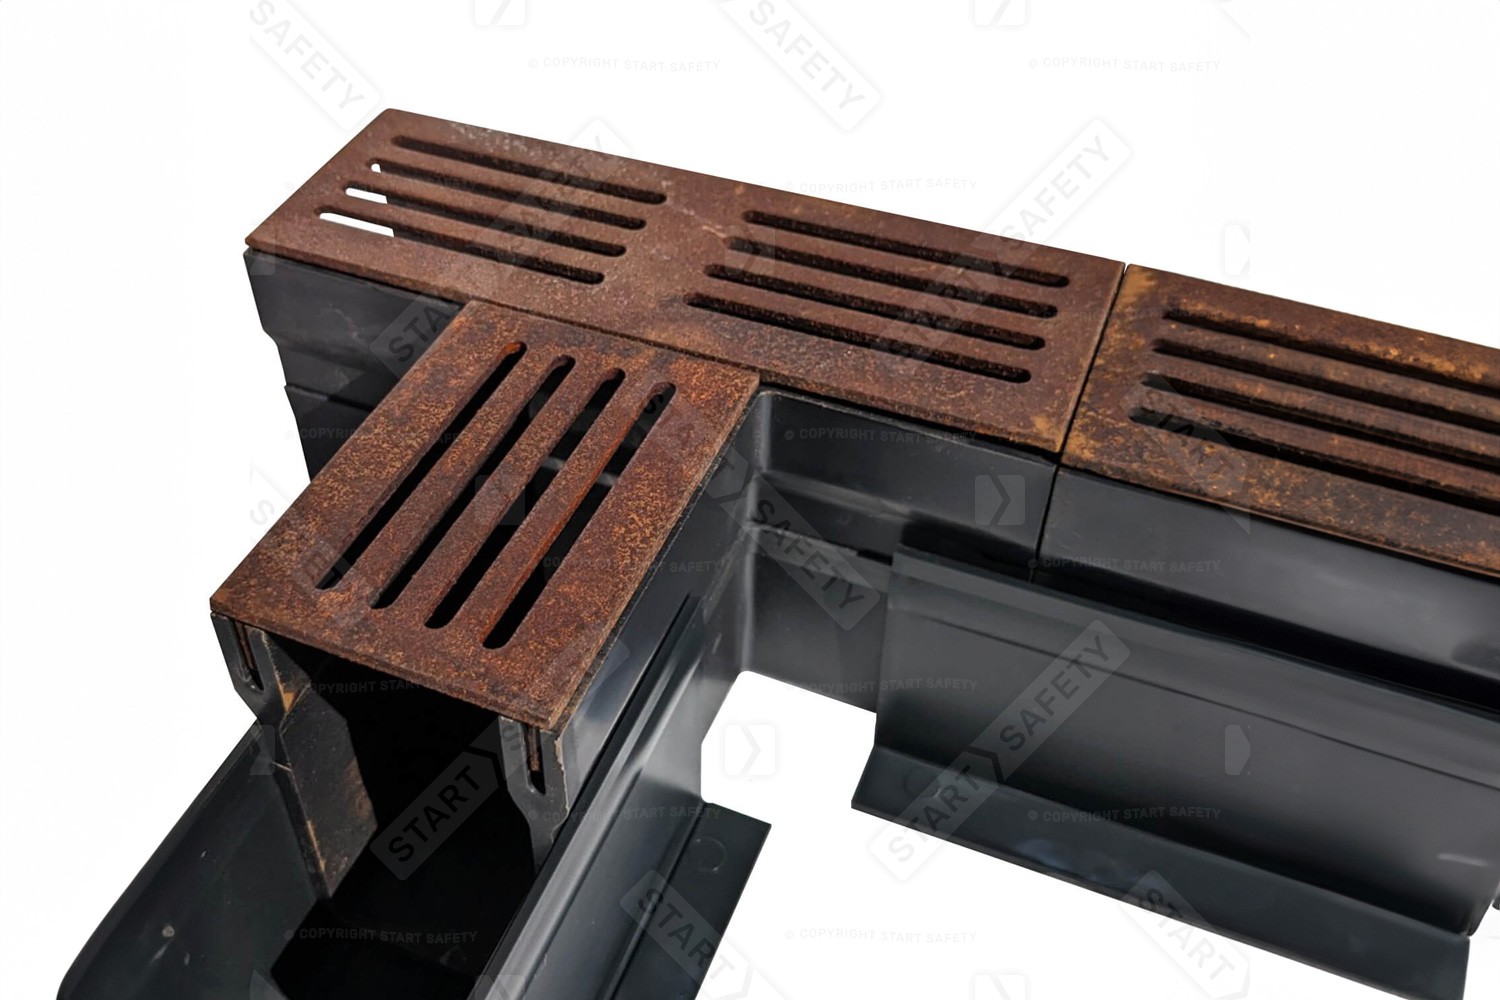 Installation of a Alusthetic Threshold Drainage Channel Connection in Corten Steel